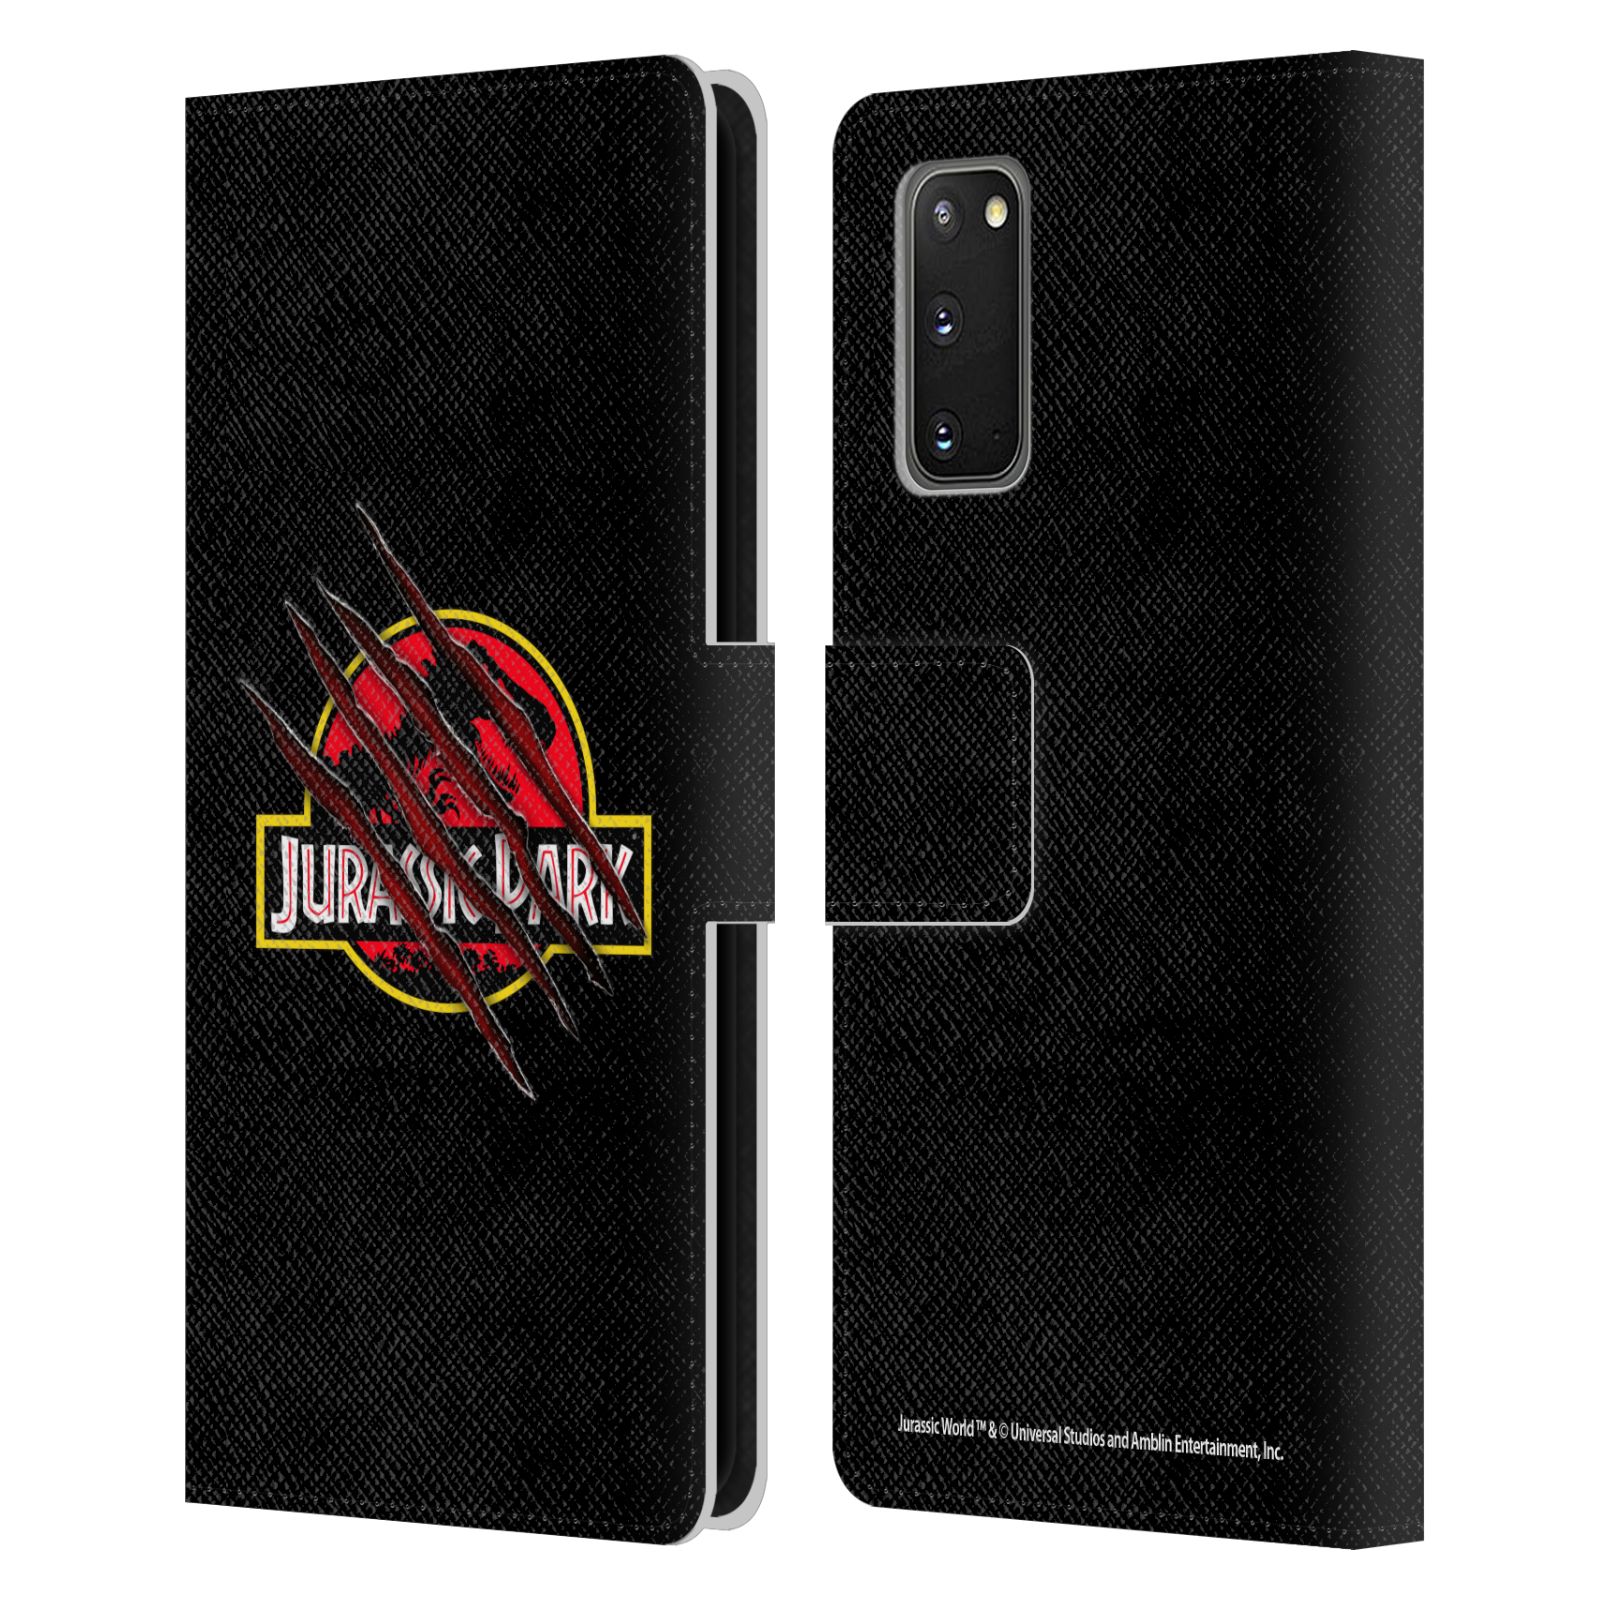 thumbnail 8 - OFFICIAL JURASSIC PARK LOGO LEATHER BOOK WALLET CASE COVER FOR SAMSUNG PHONES 1